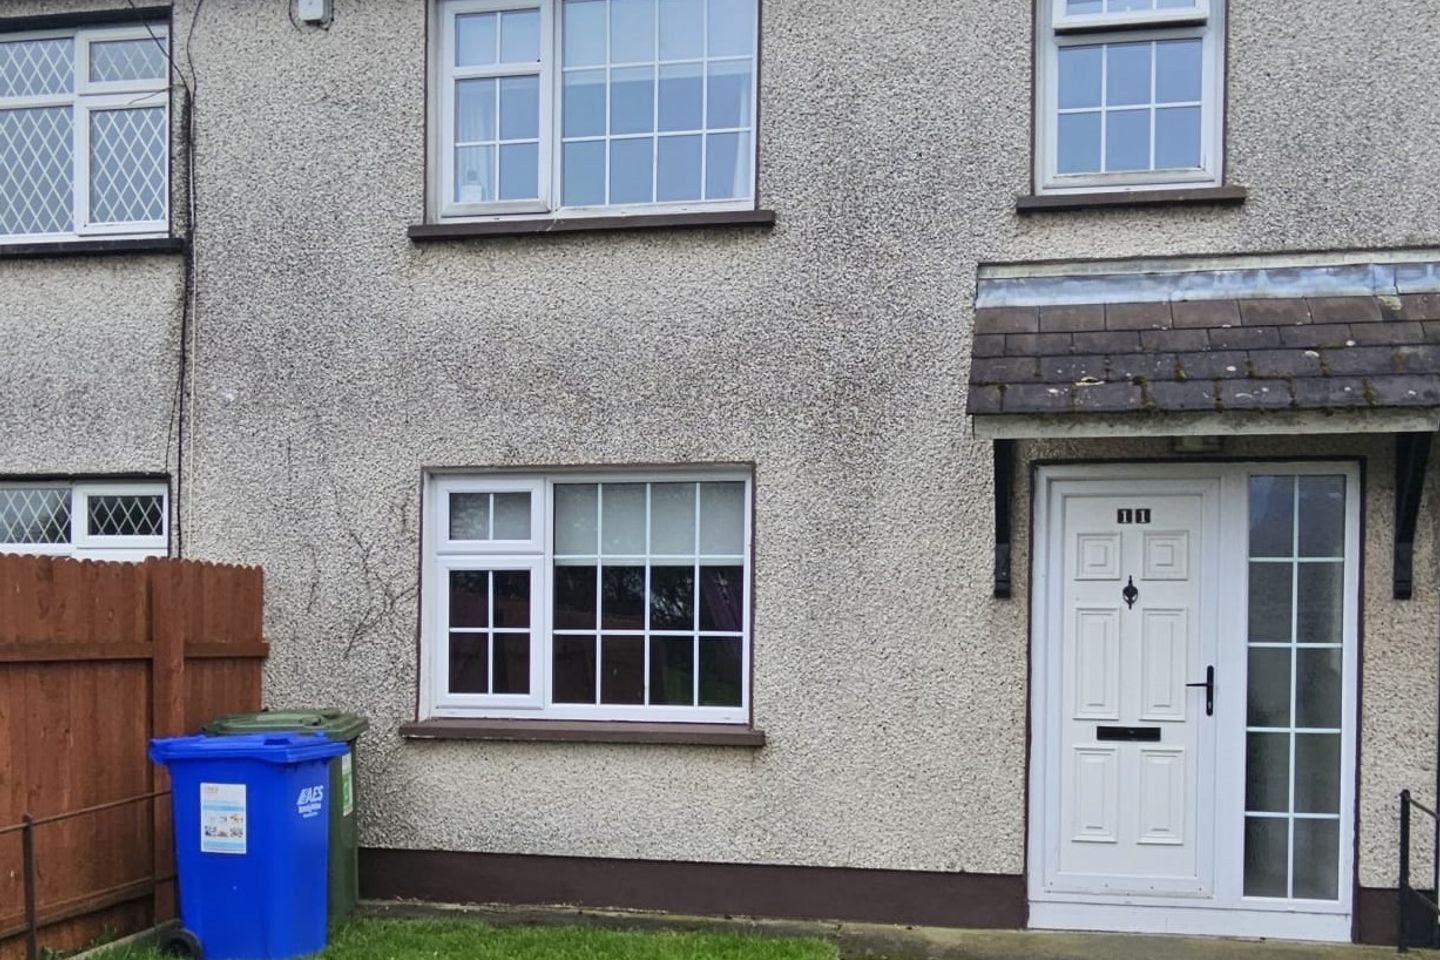 11 St Columbas Place, Clonminch, Tullamore, Co. Offaly